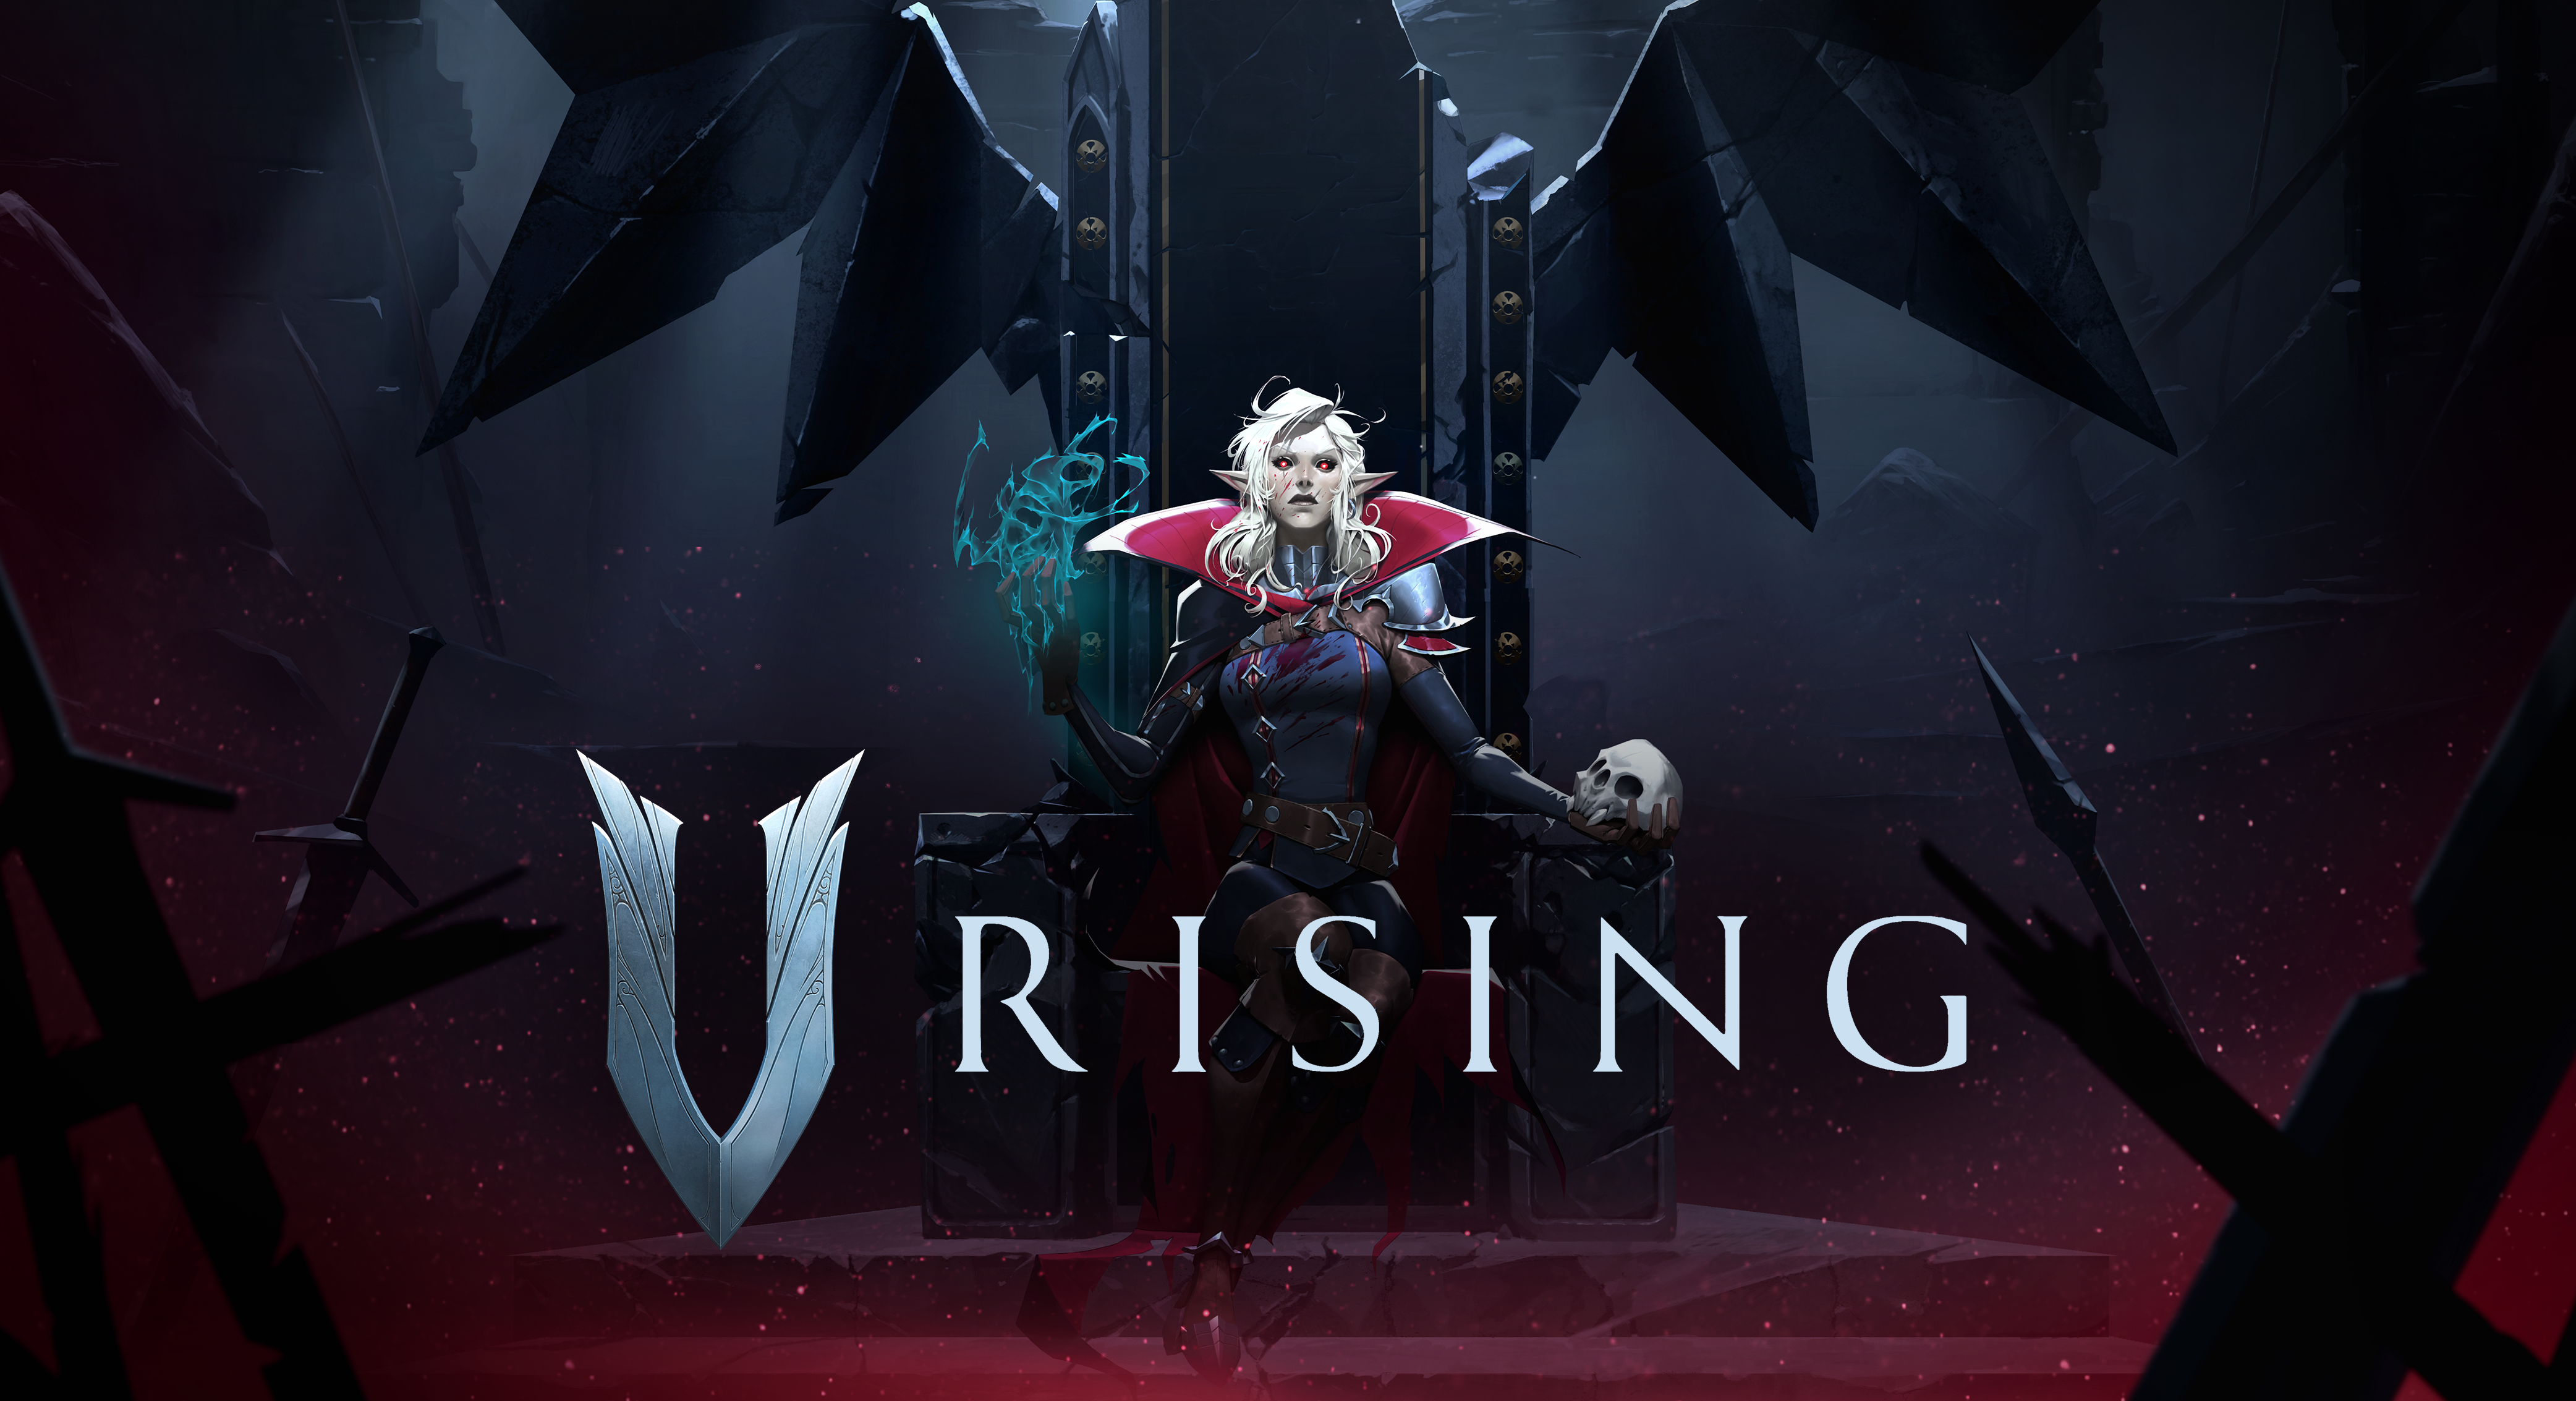 v rising is available in early access!